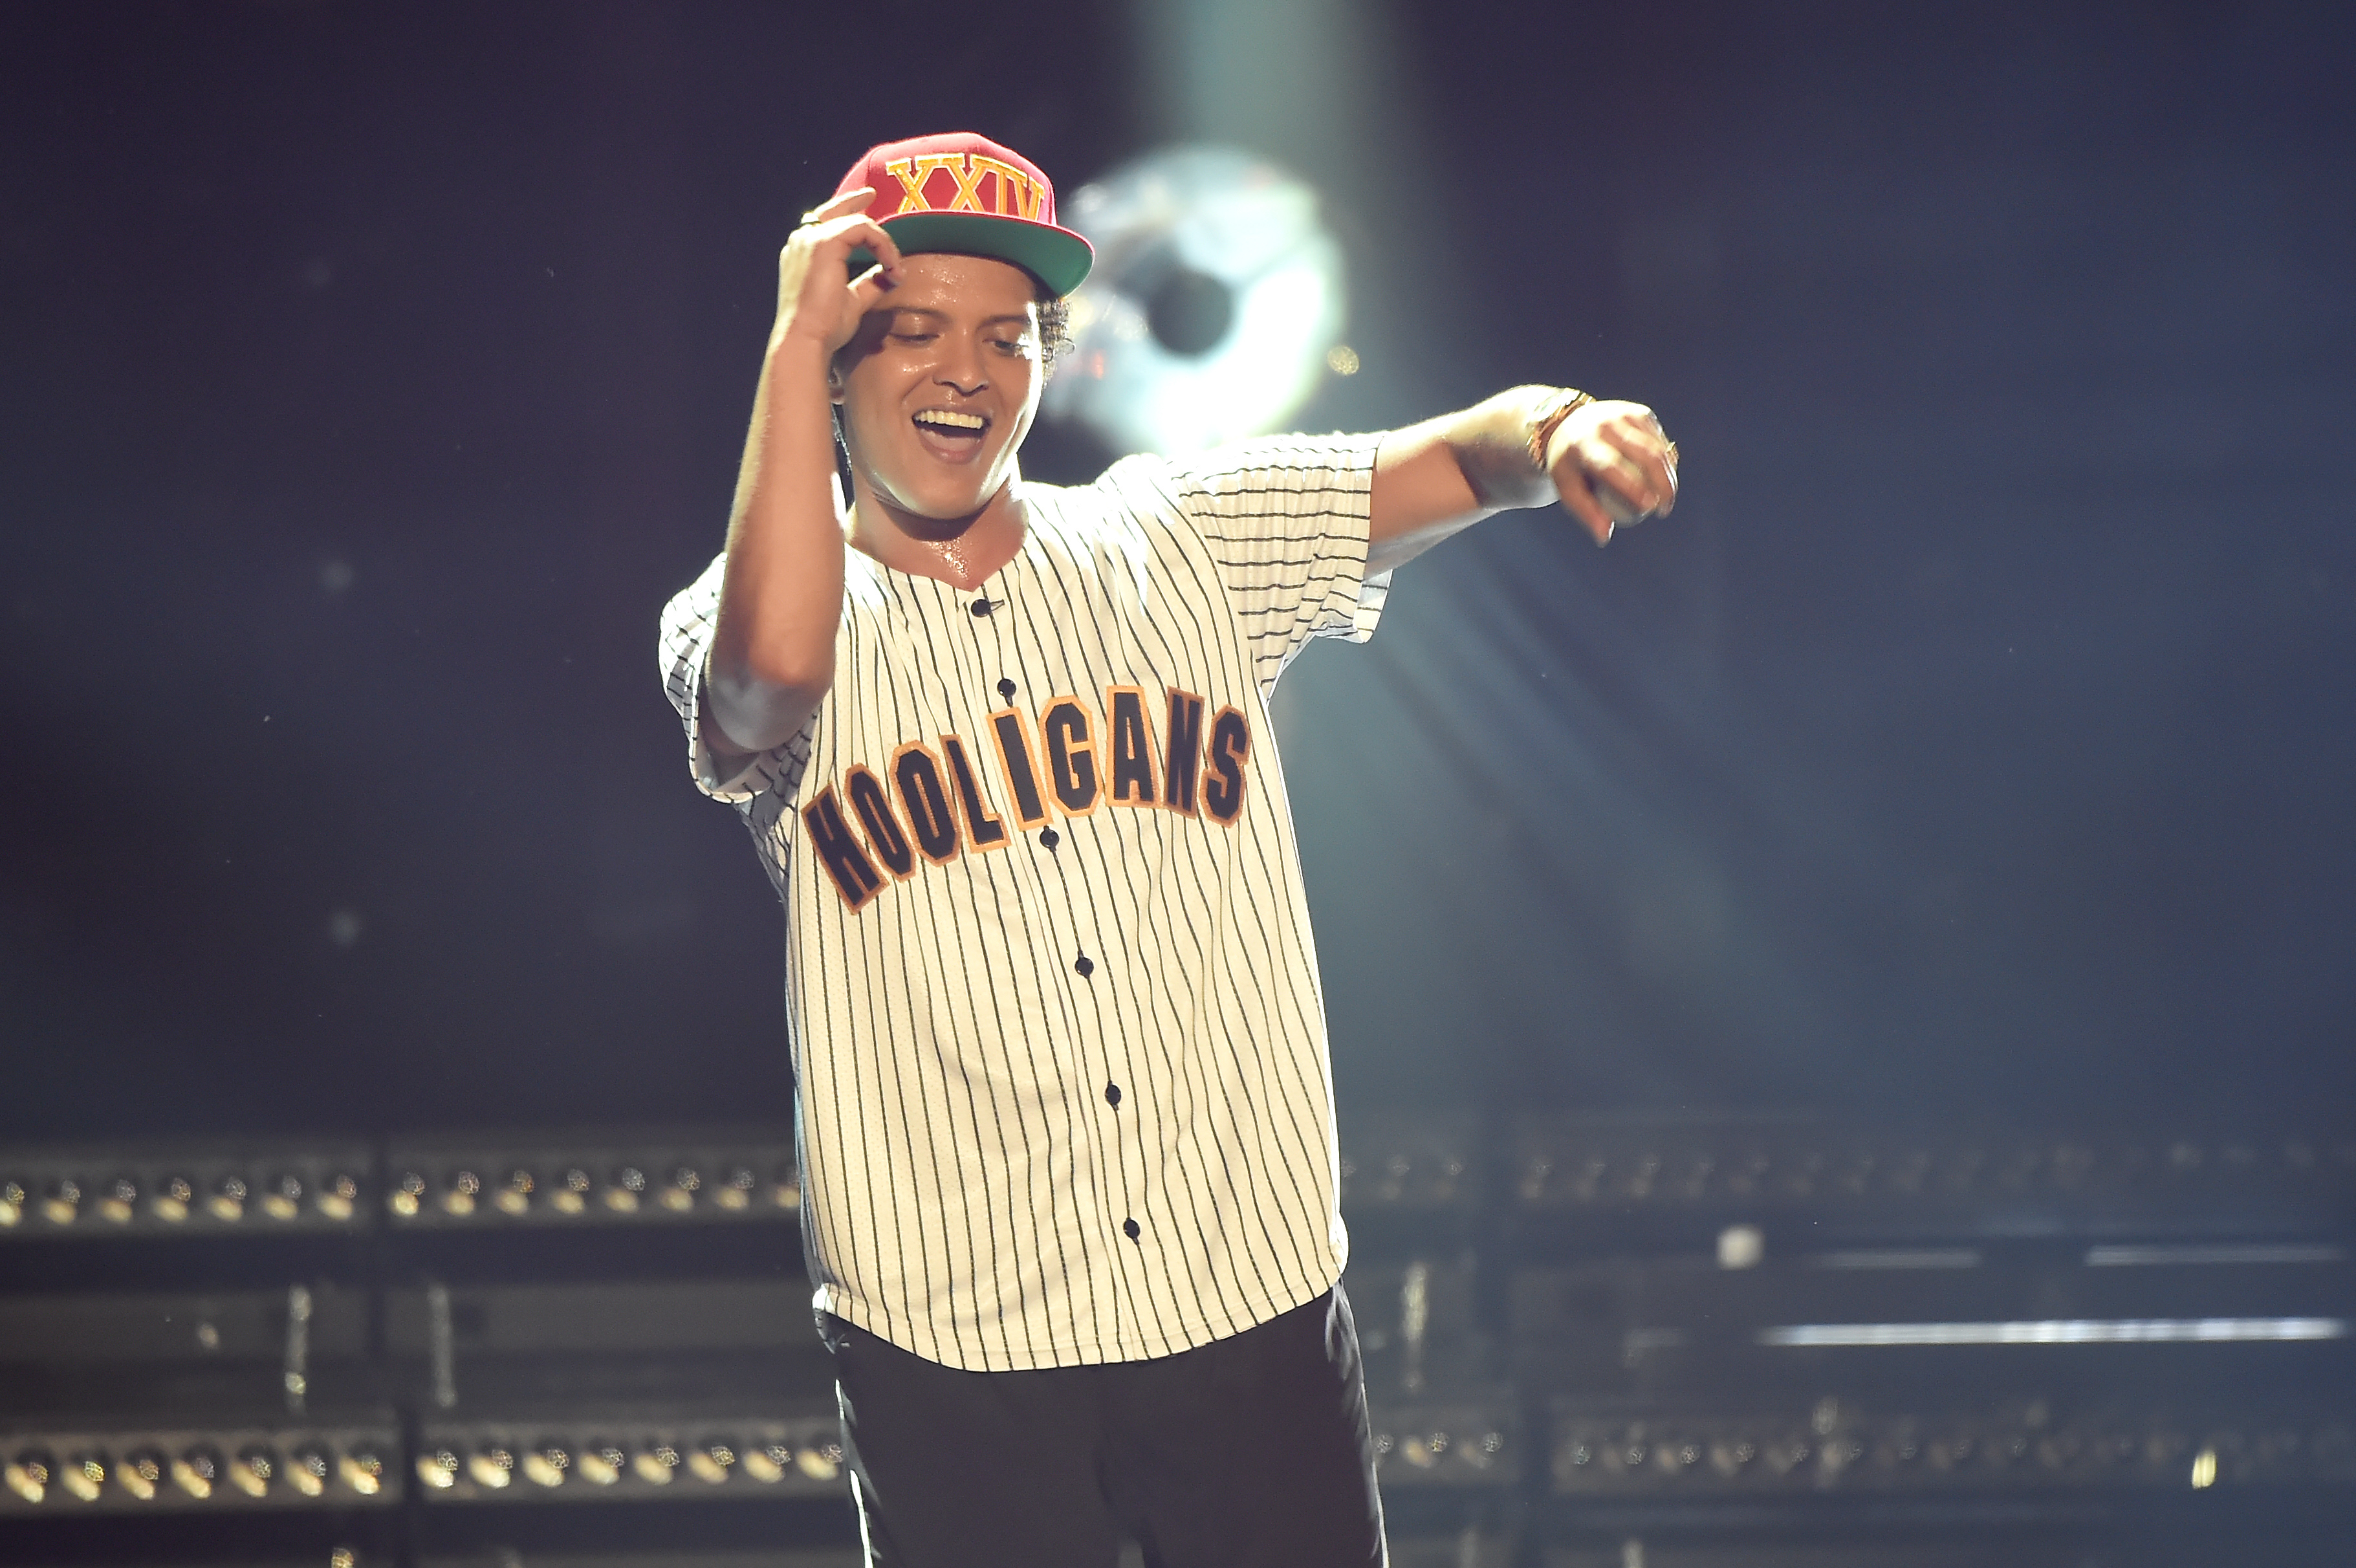 Bruno Mars in a &#x27;Hooligans&#x27; baseball jersey and cap, performing on stage with a microphone